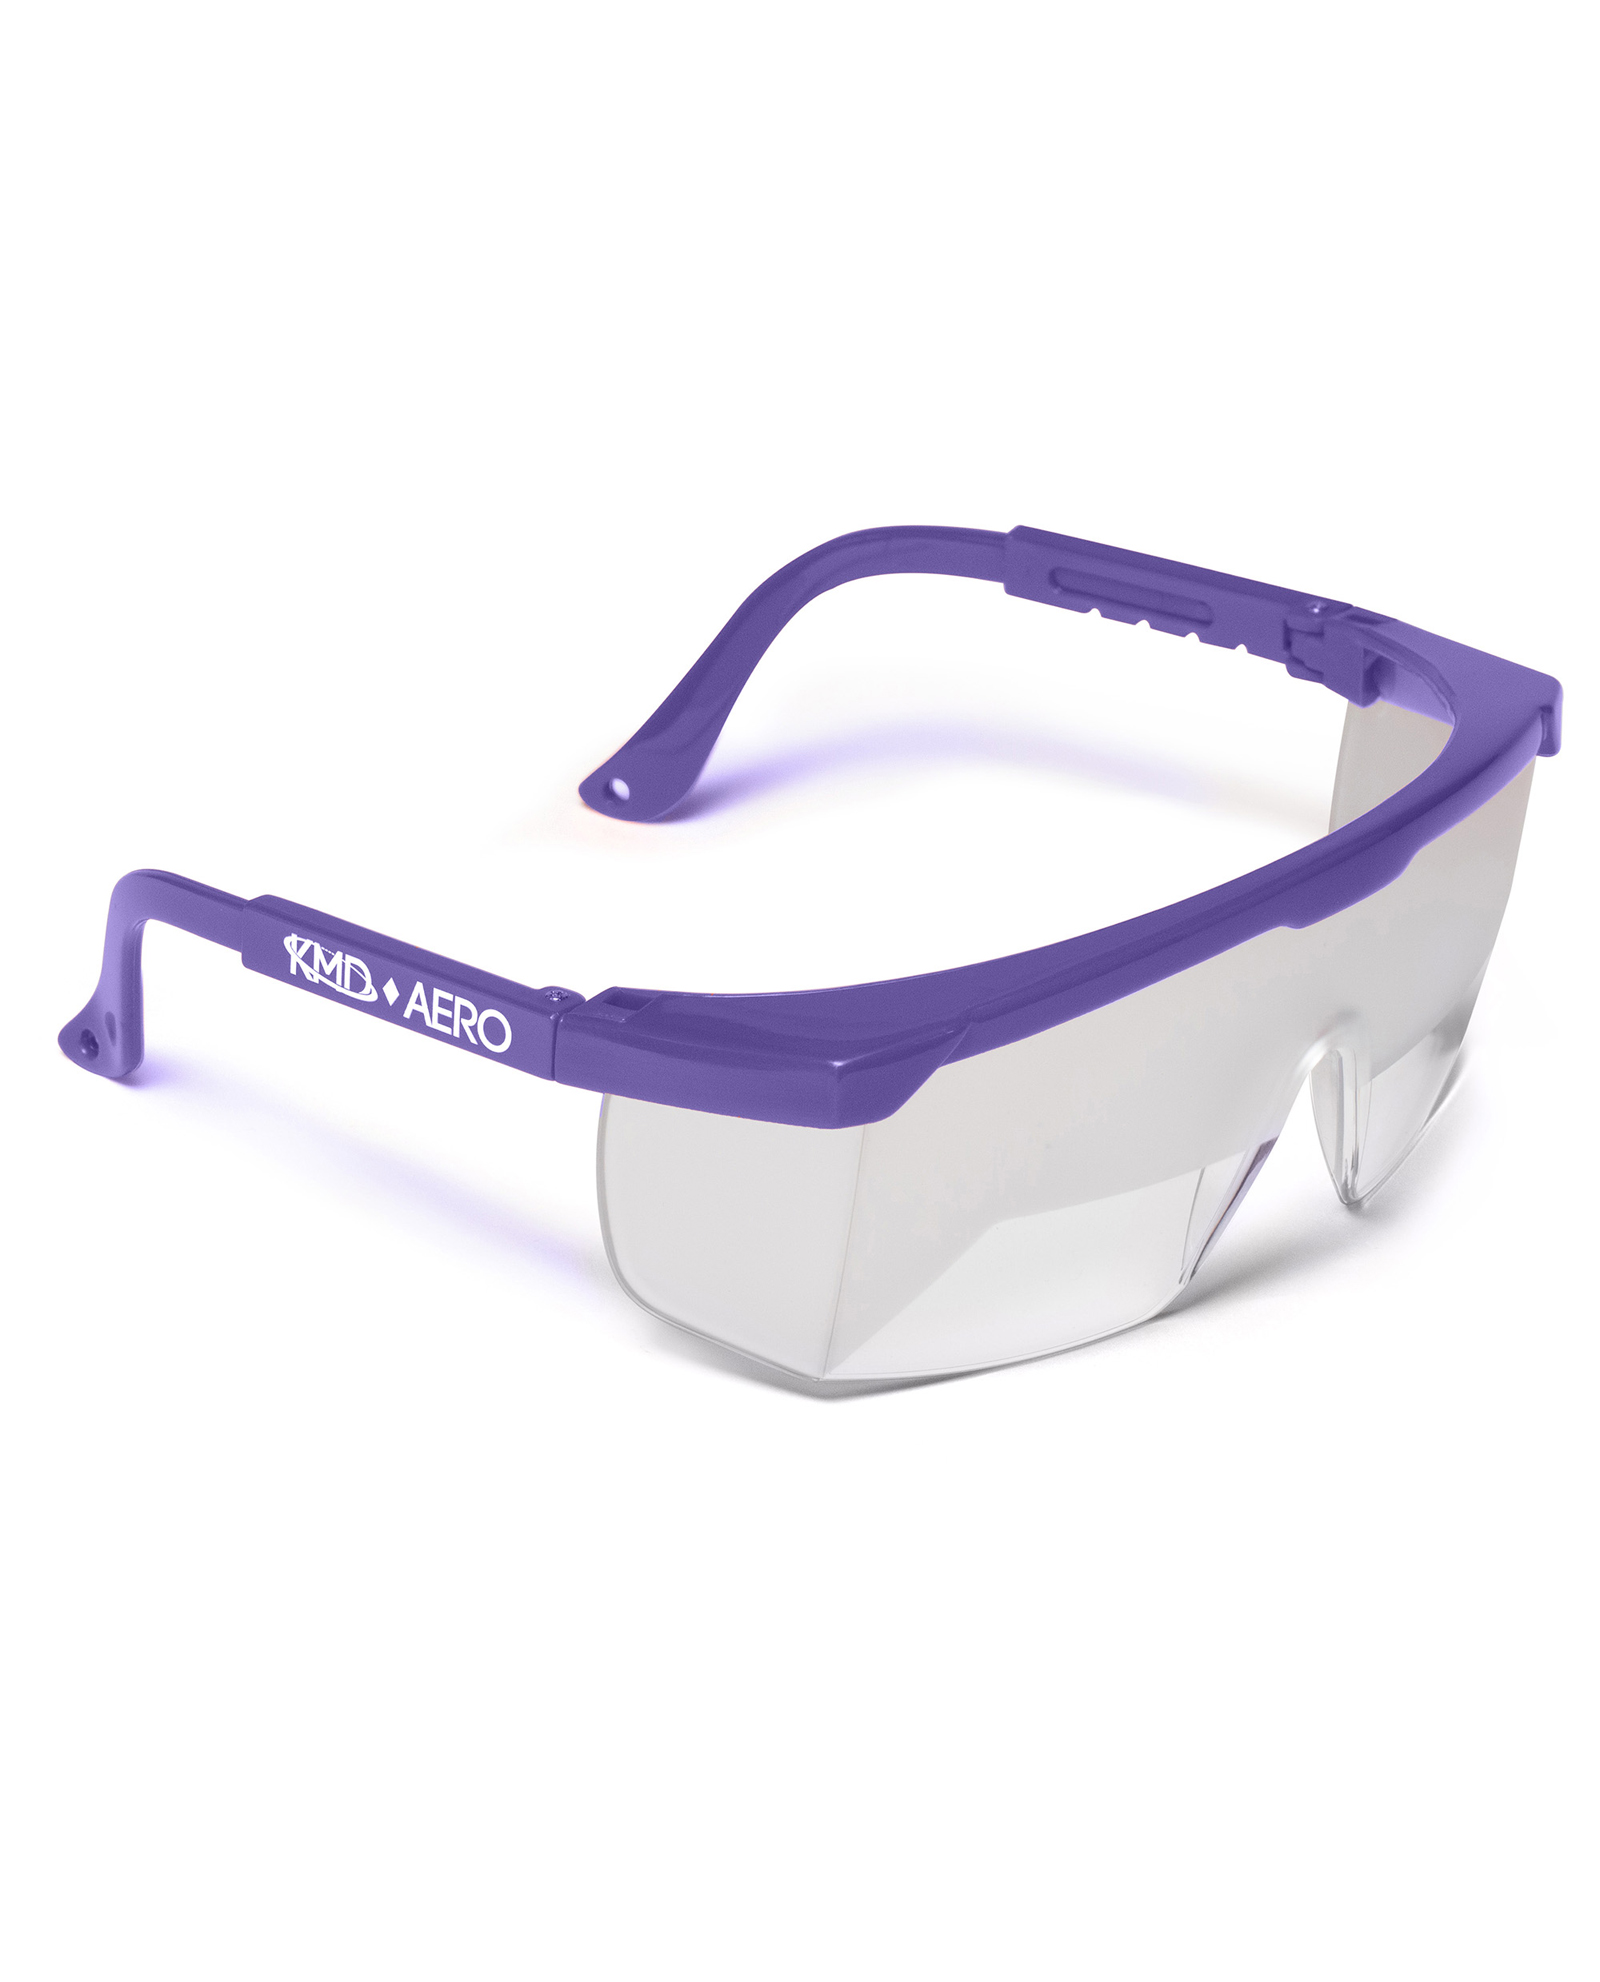 Instrument Flight Training Glasses Ifr View Limiting Device Main Purple Kmd Direct